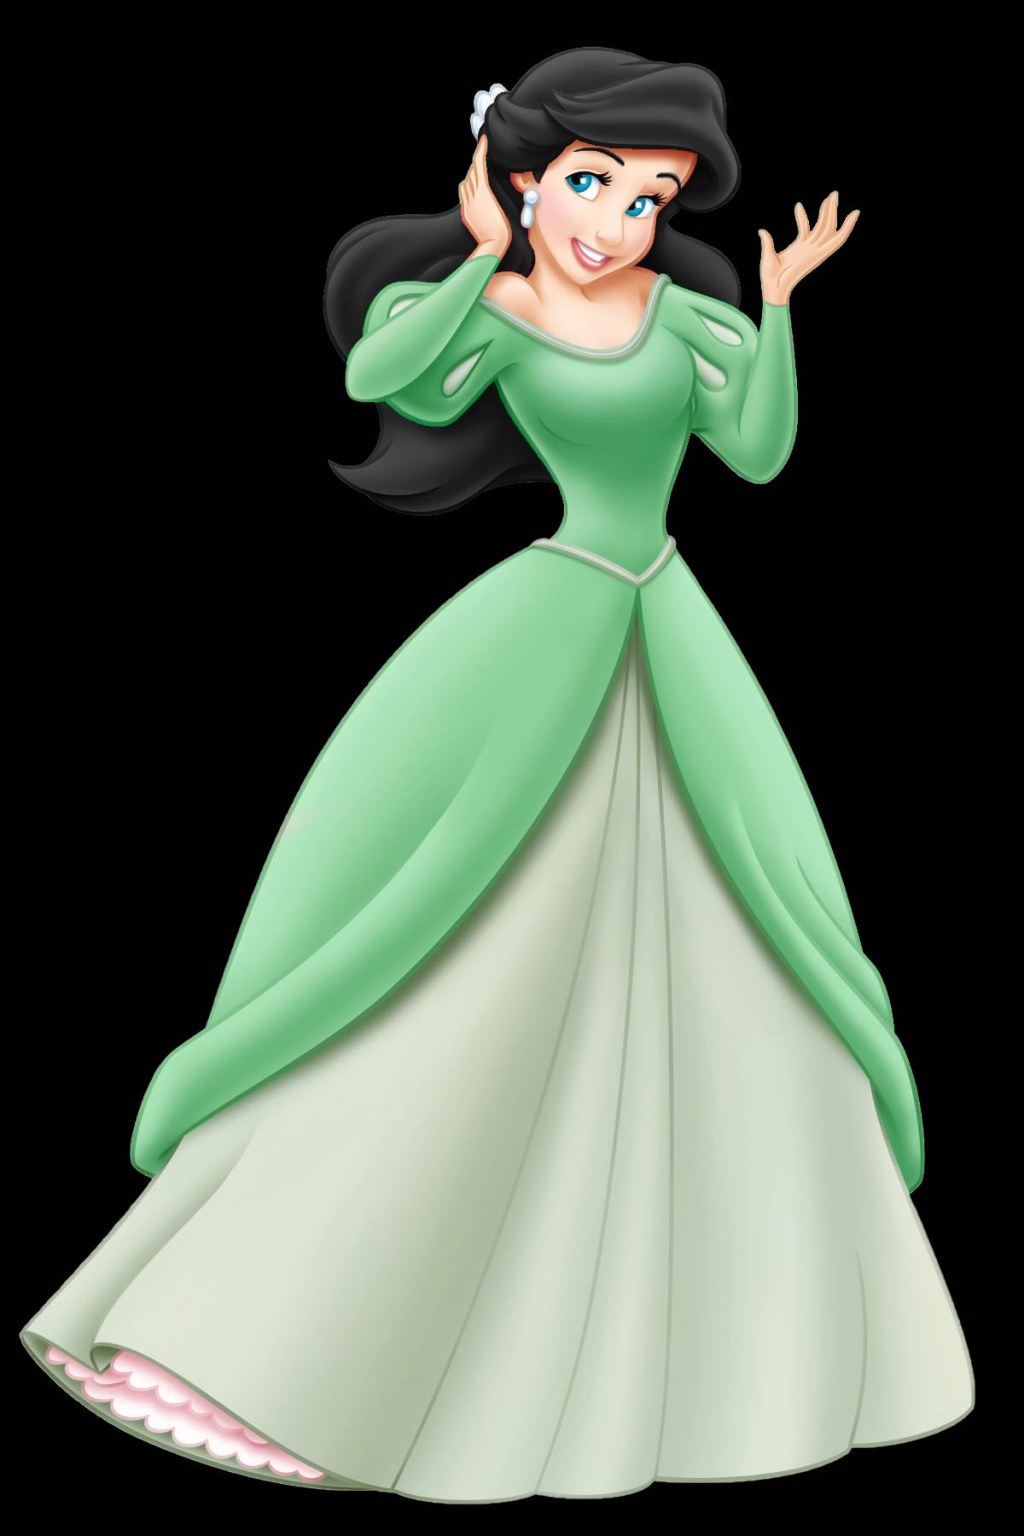 Picture of: Princess Melody Series: Green Dress # by MermaidMelodyEdits on